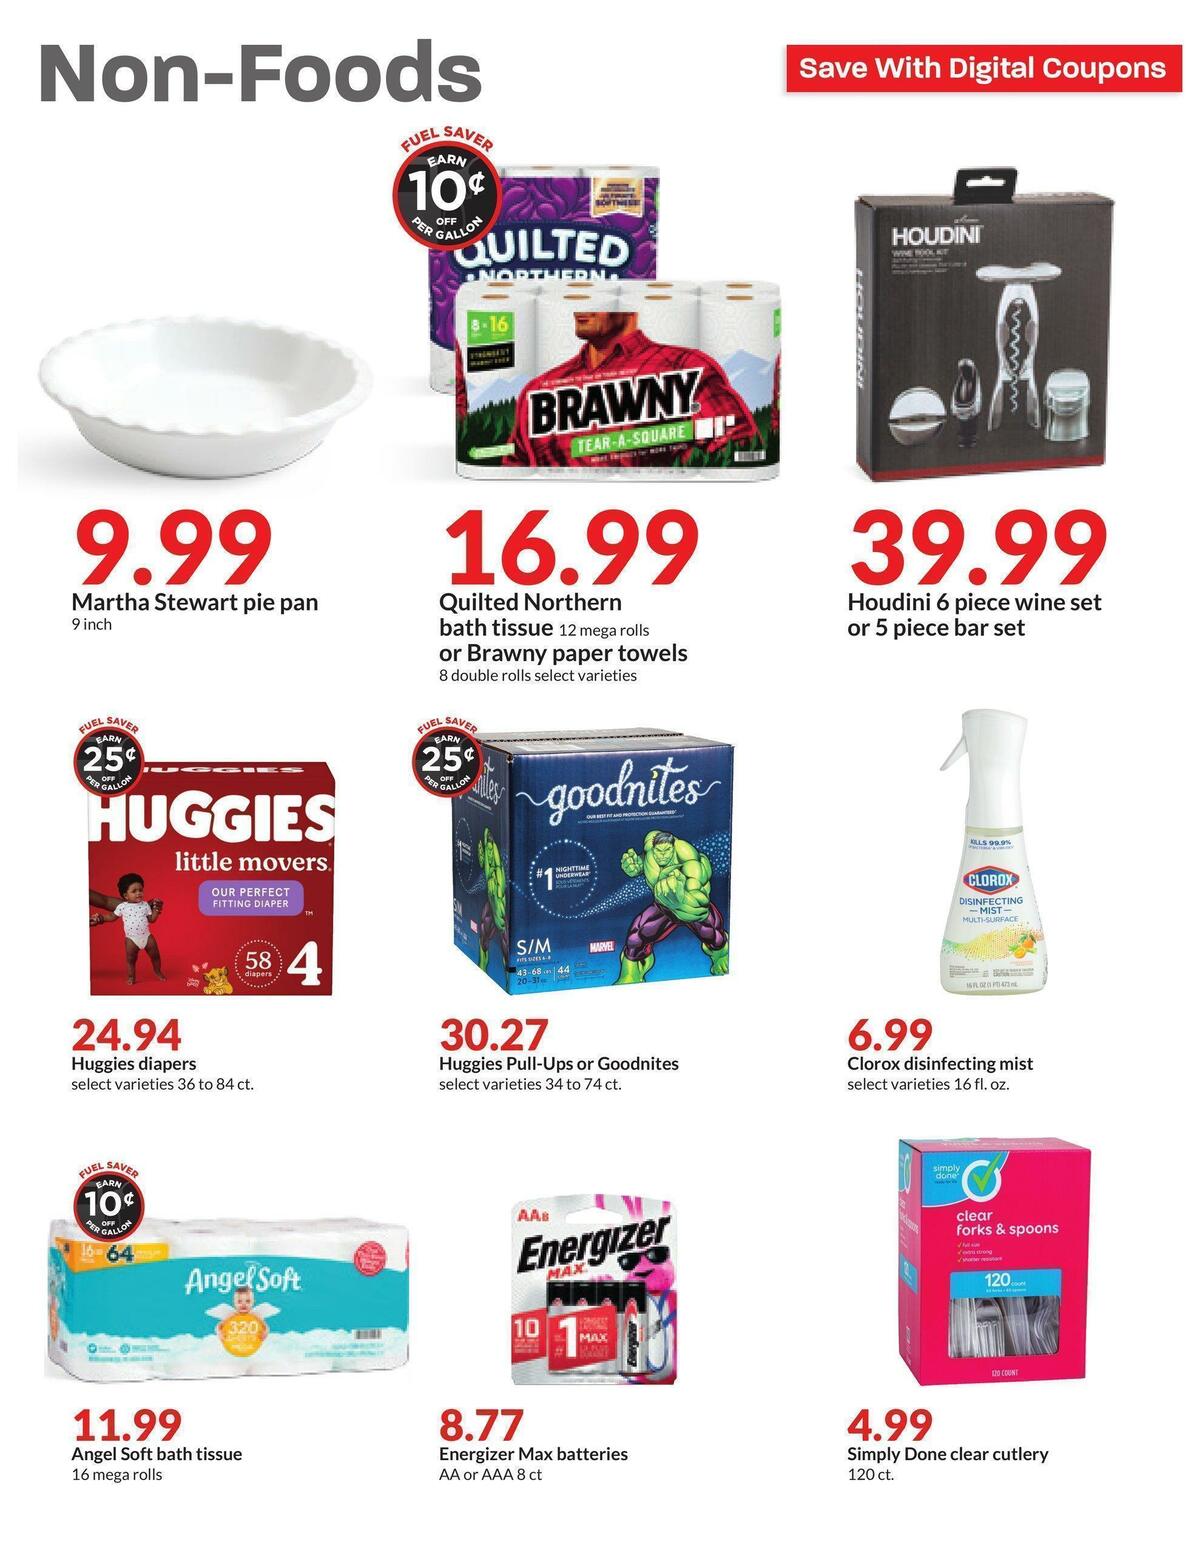 Hy-Vee Weekly Ad from December 21